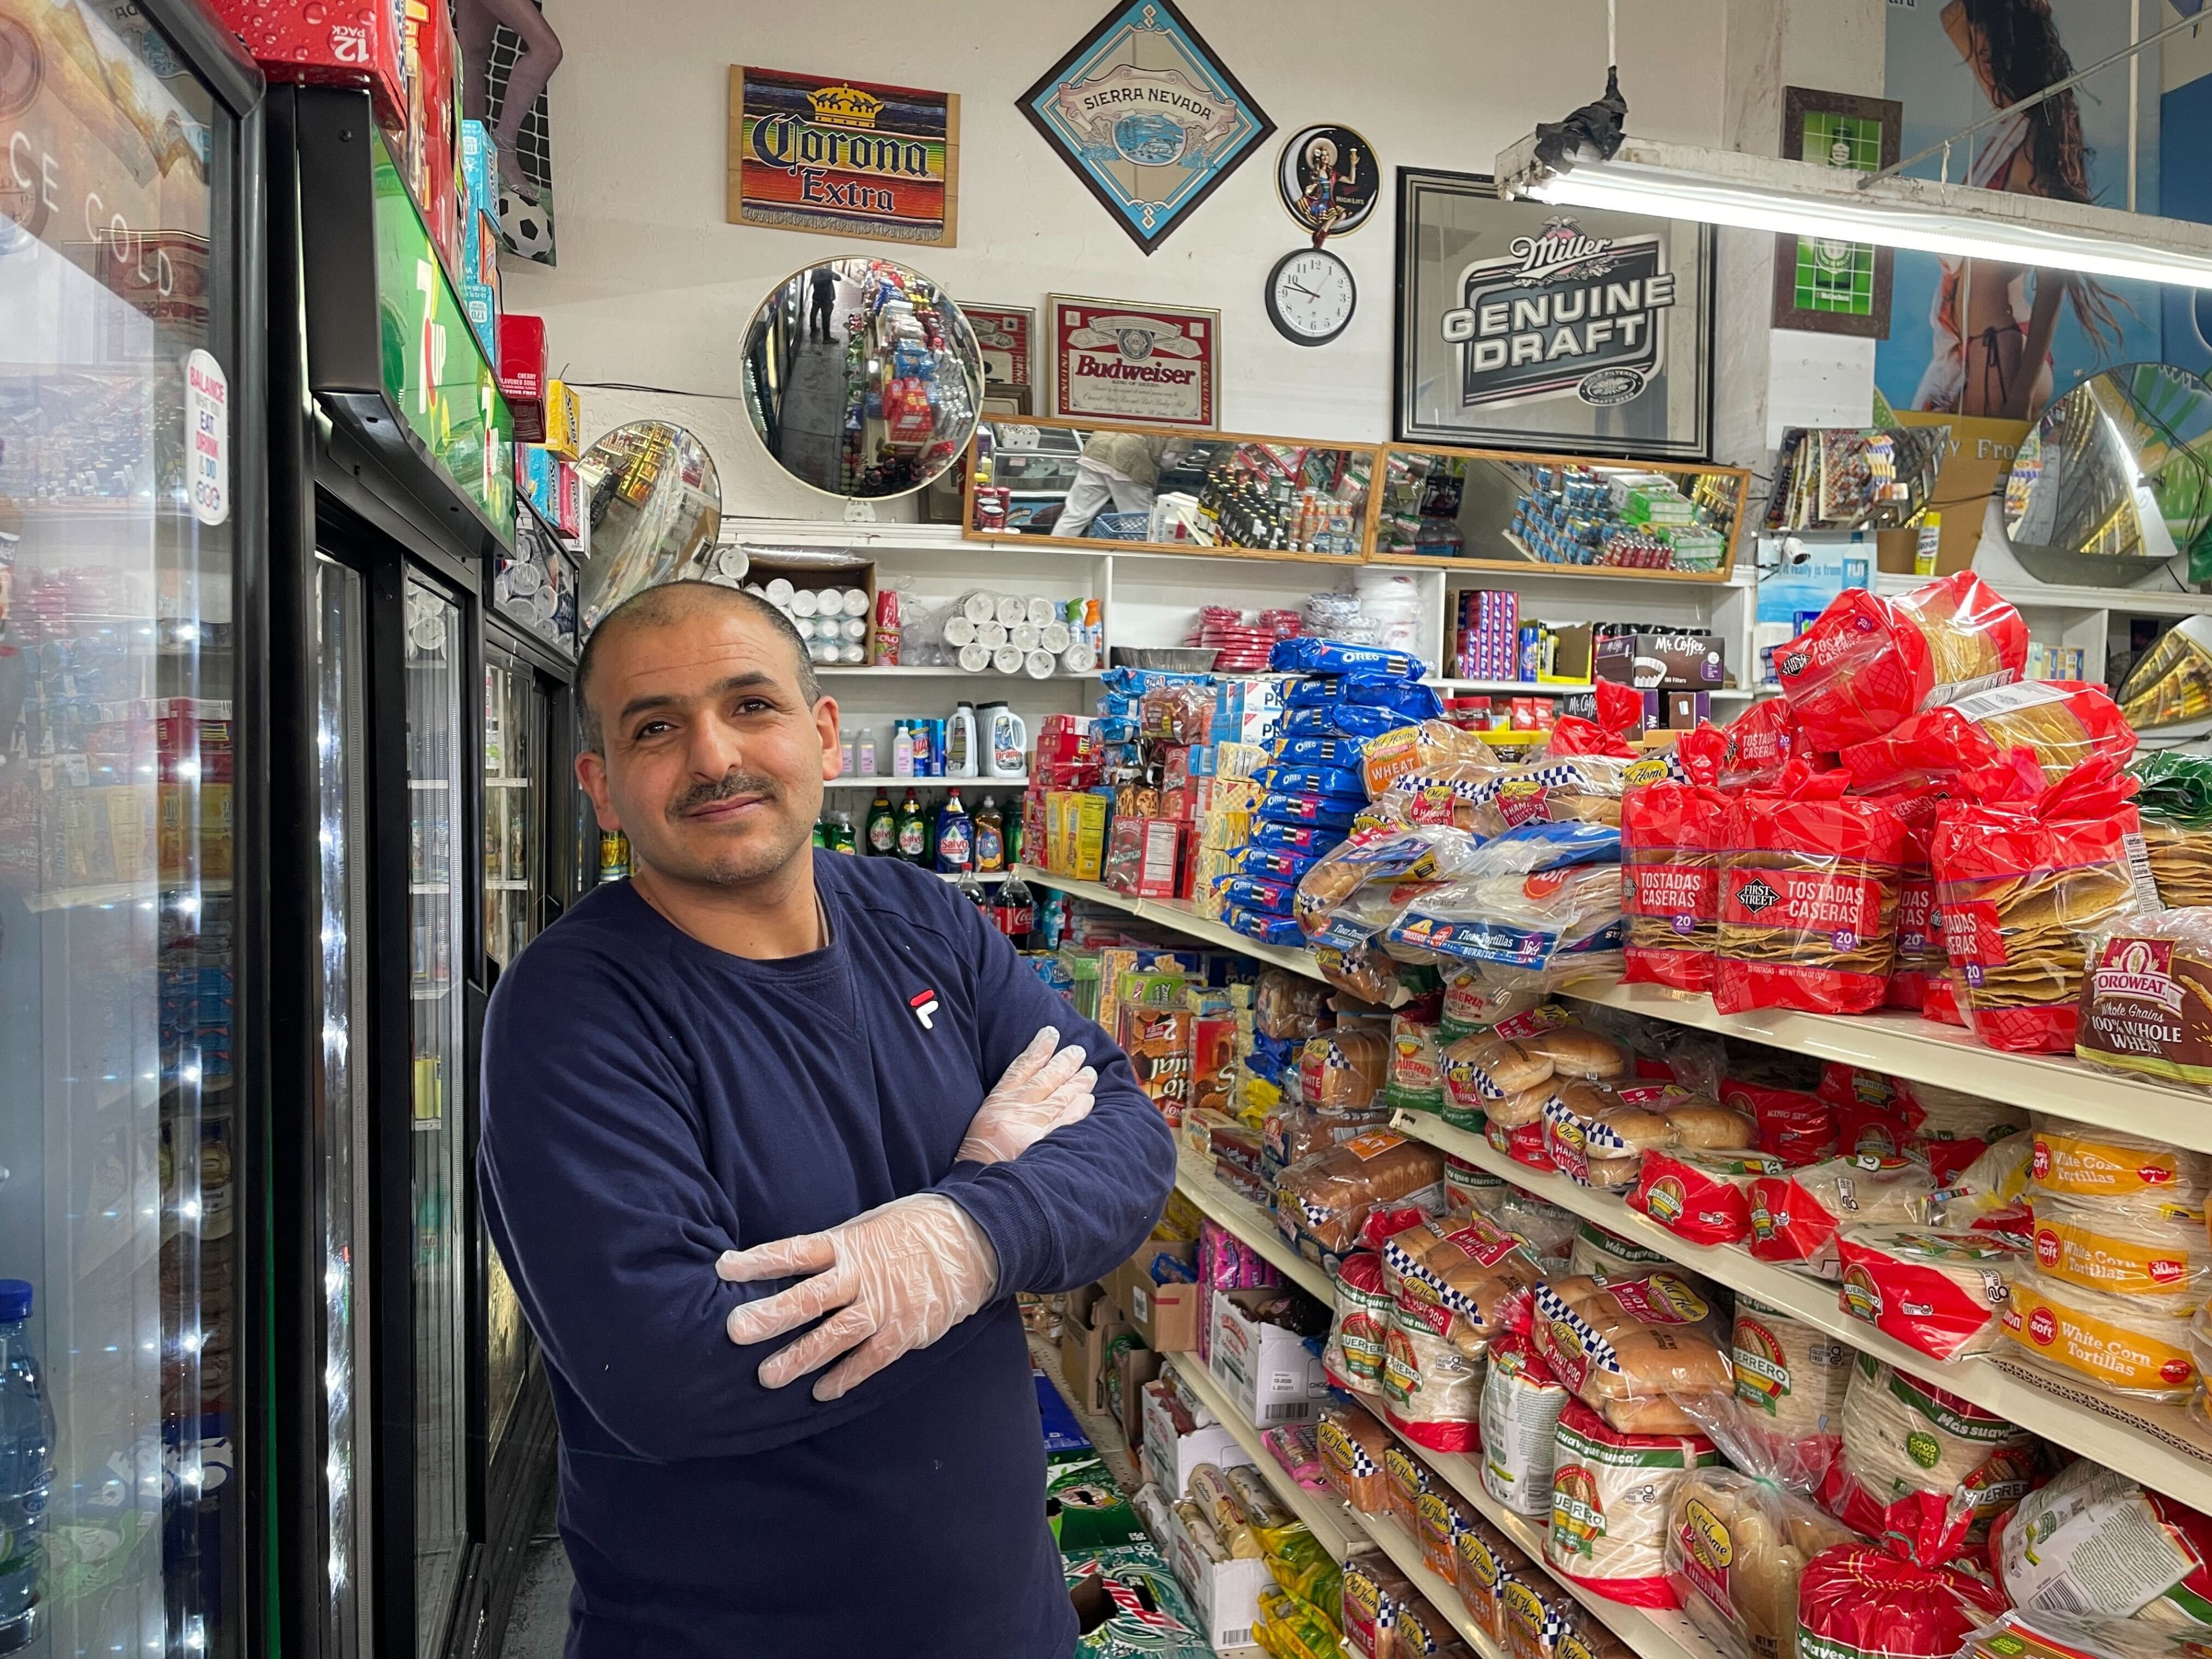 A man stands smiling in a store aisle, surrounded by snacks and beverages, wearing gloves and casual attire.